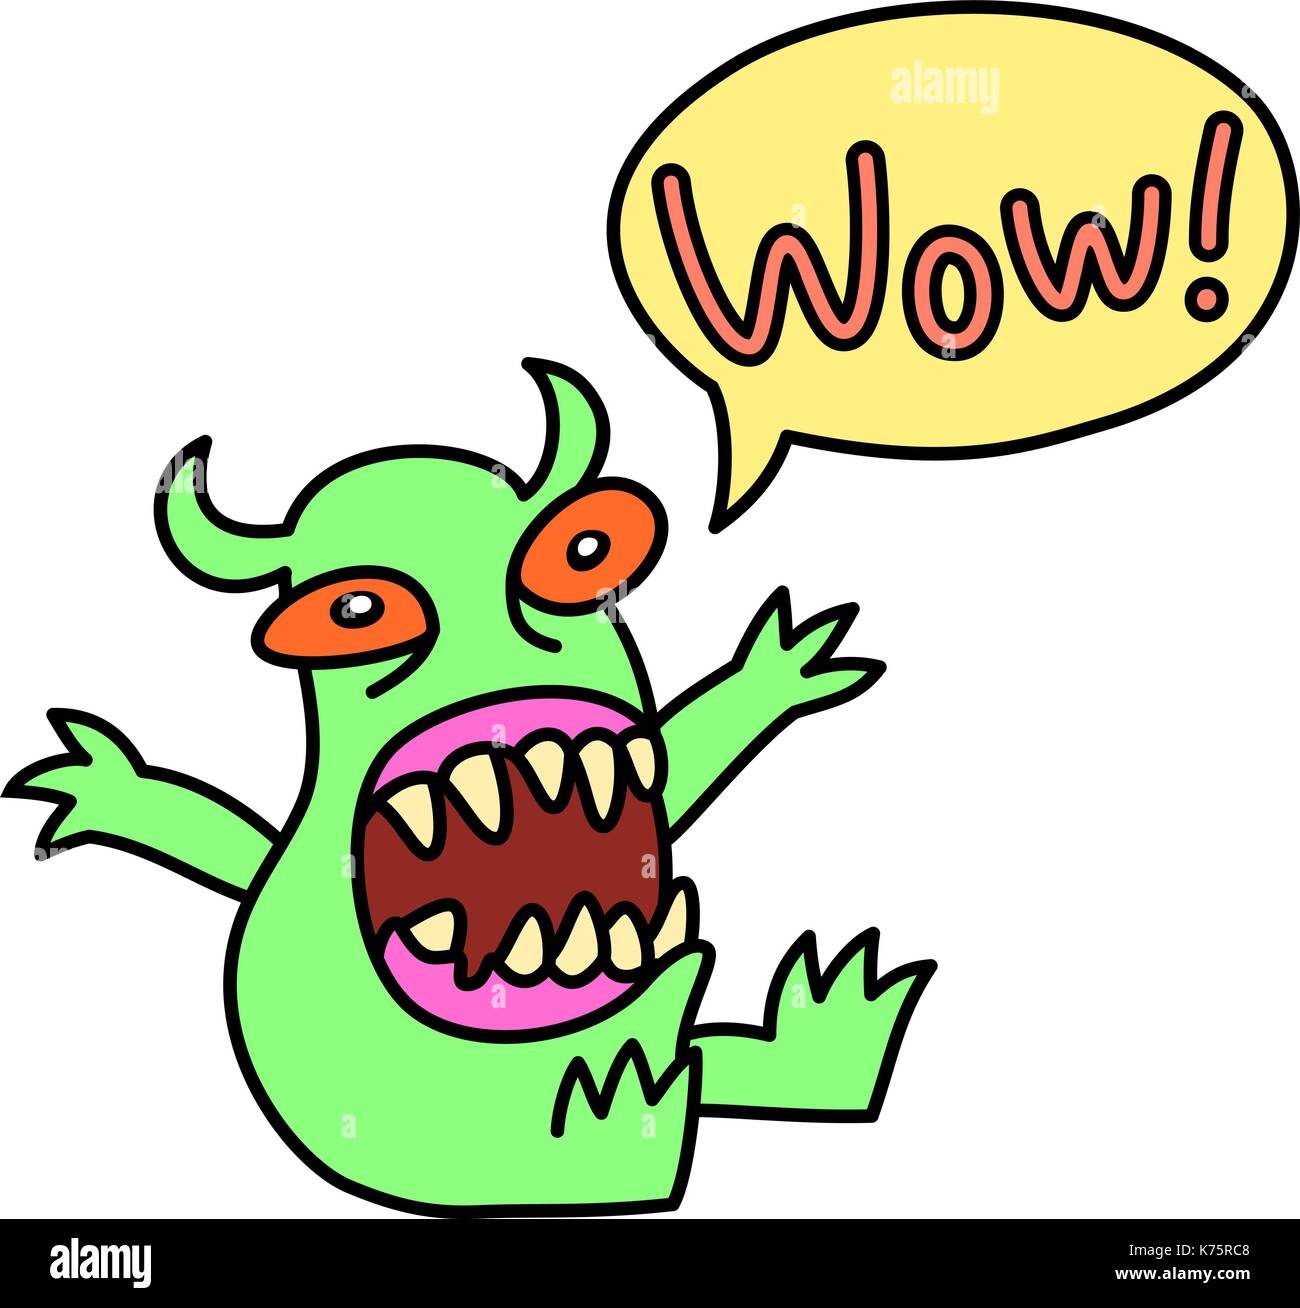 Wow! Cartoon monster screaming. Speech Bubble. Vector illustration. Funny cute emoticon character. Stock Vector